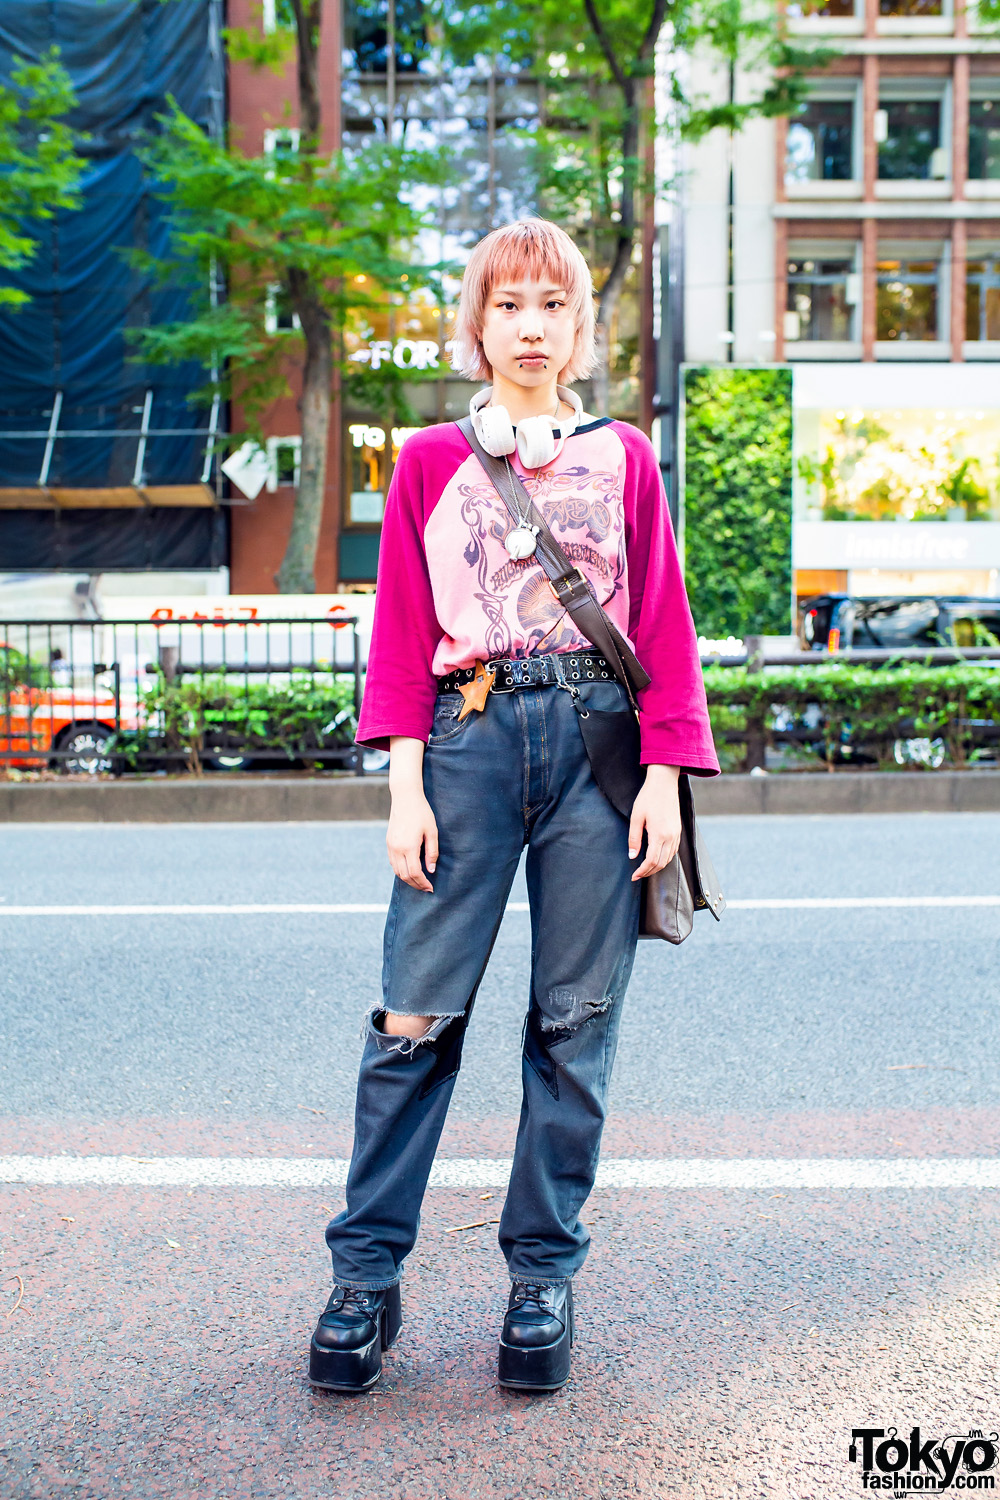 Harajuku Girl in Ripped Jeans Fashion w/ Lace Tube Top, GYDA Ripped Jeans,  Resexxy Heels, Vivienne Westwood Bag, Louis Vuitton and Coach Accessories –  Tokyo Fashion